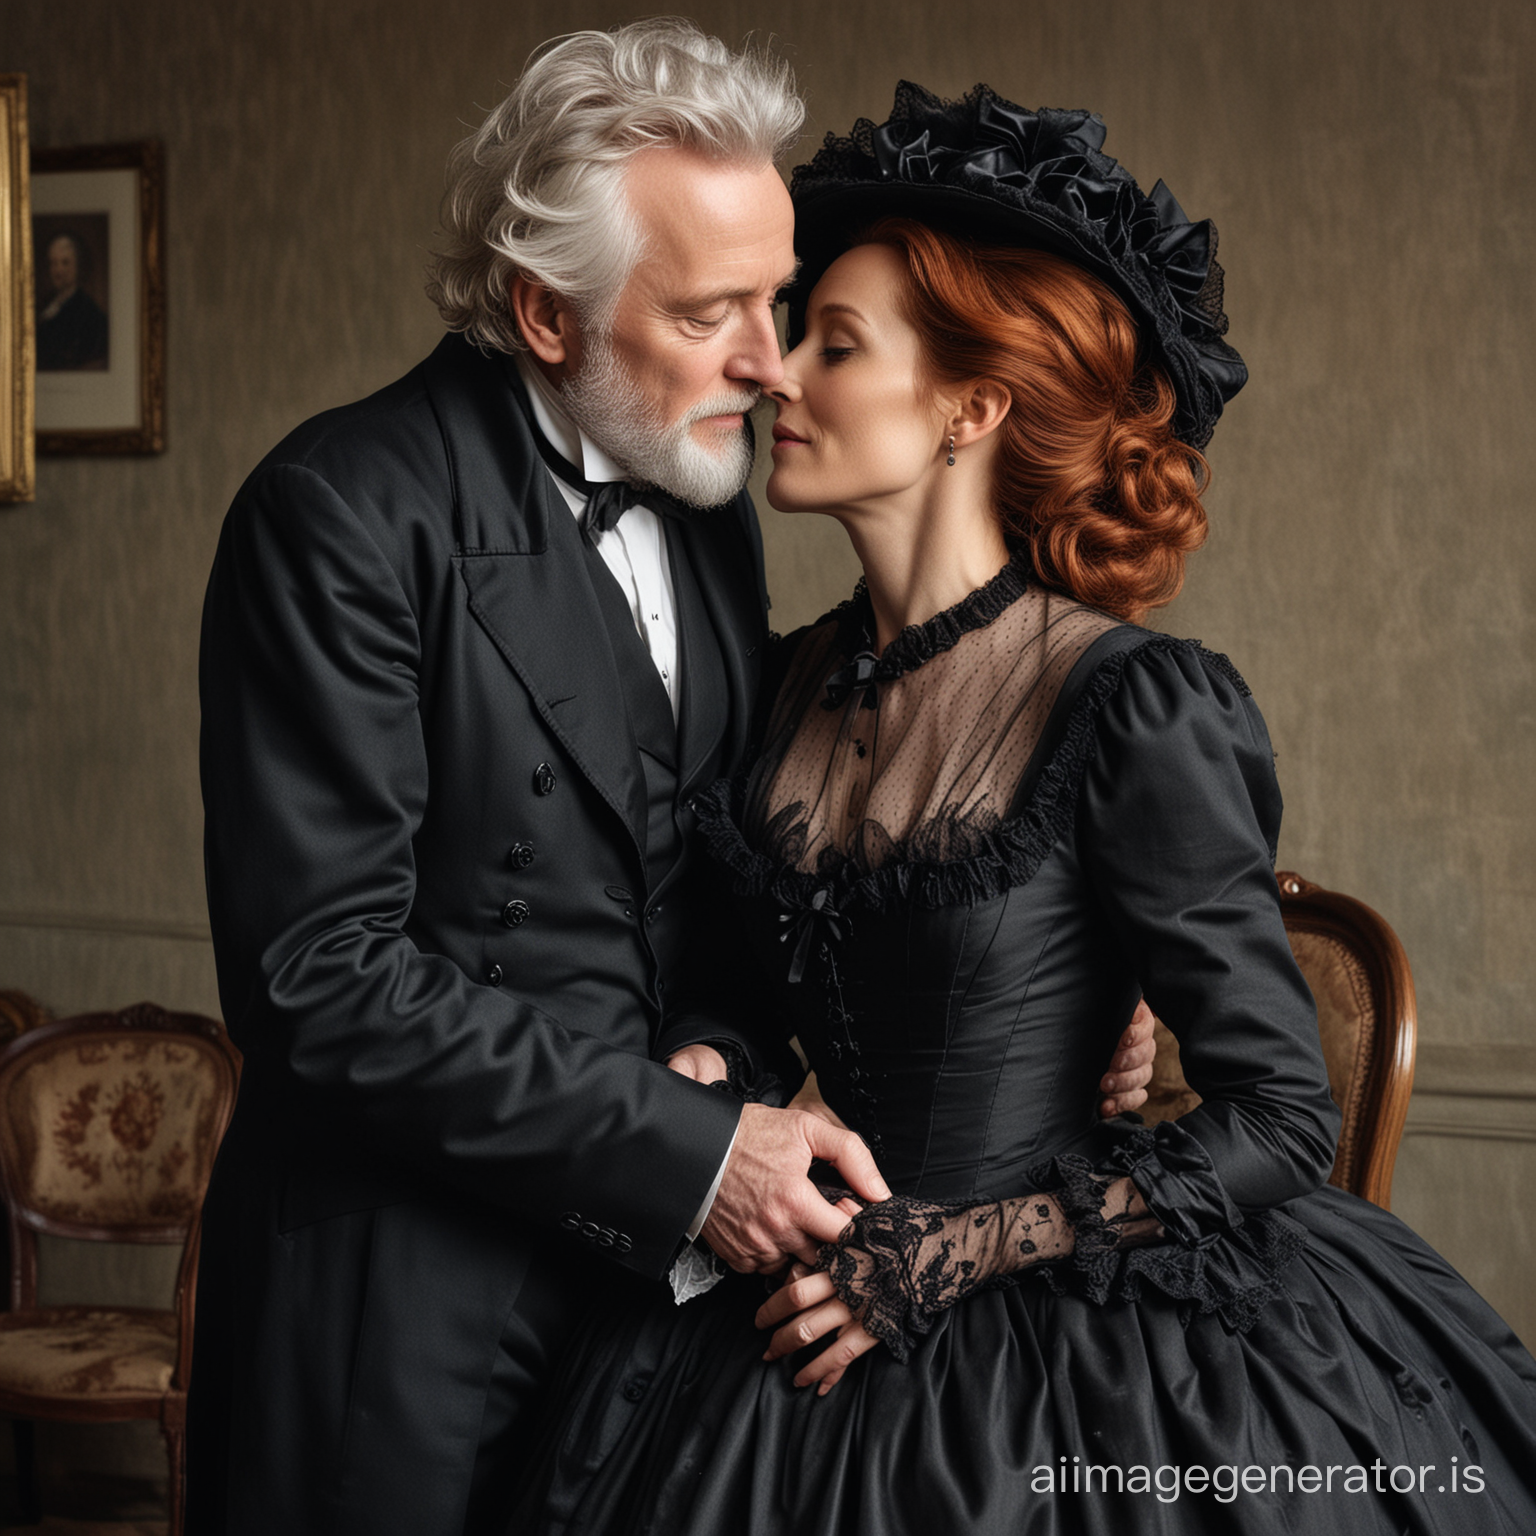 red hair Gillian Anderson wearing a dark chocolate floor-length loose billowing 1860 Victorian crinoline poofy dress with a frilly bonnet kissing lovingly an old man dressed into a black Victorian suit who seems to be her dear husband